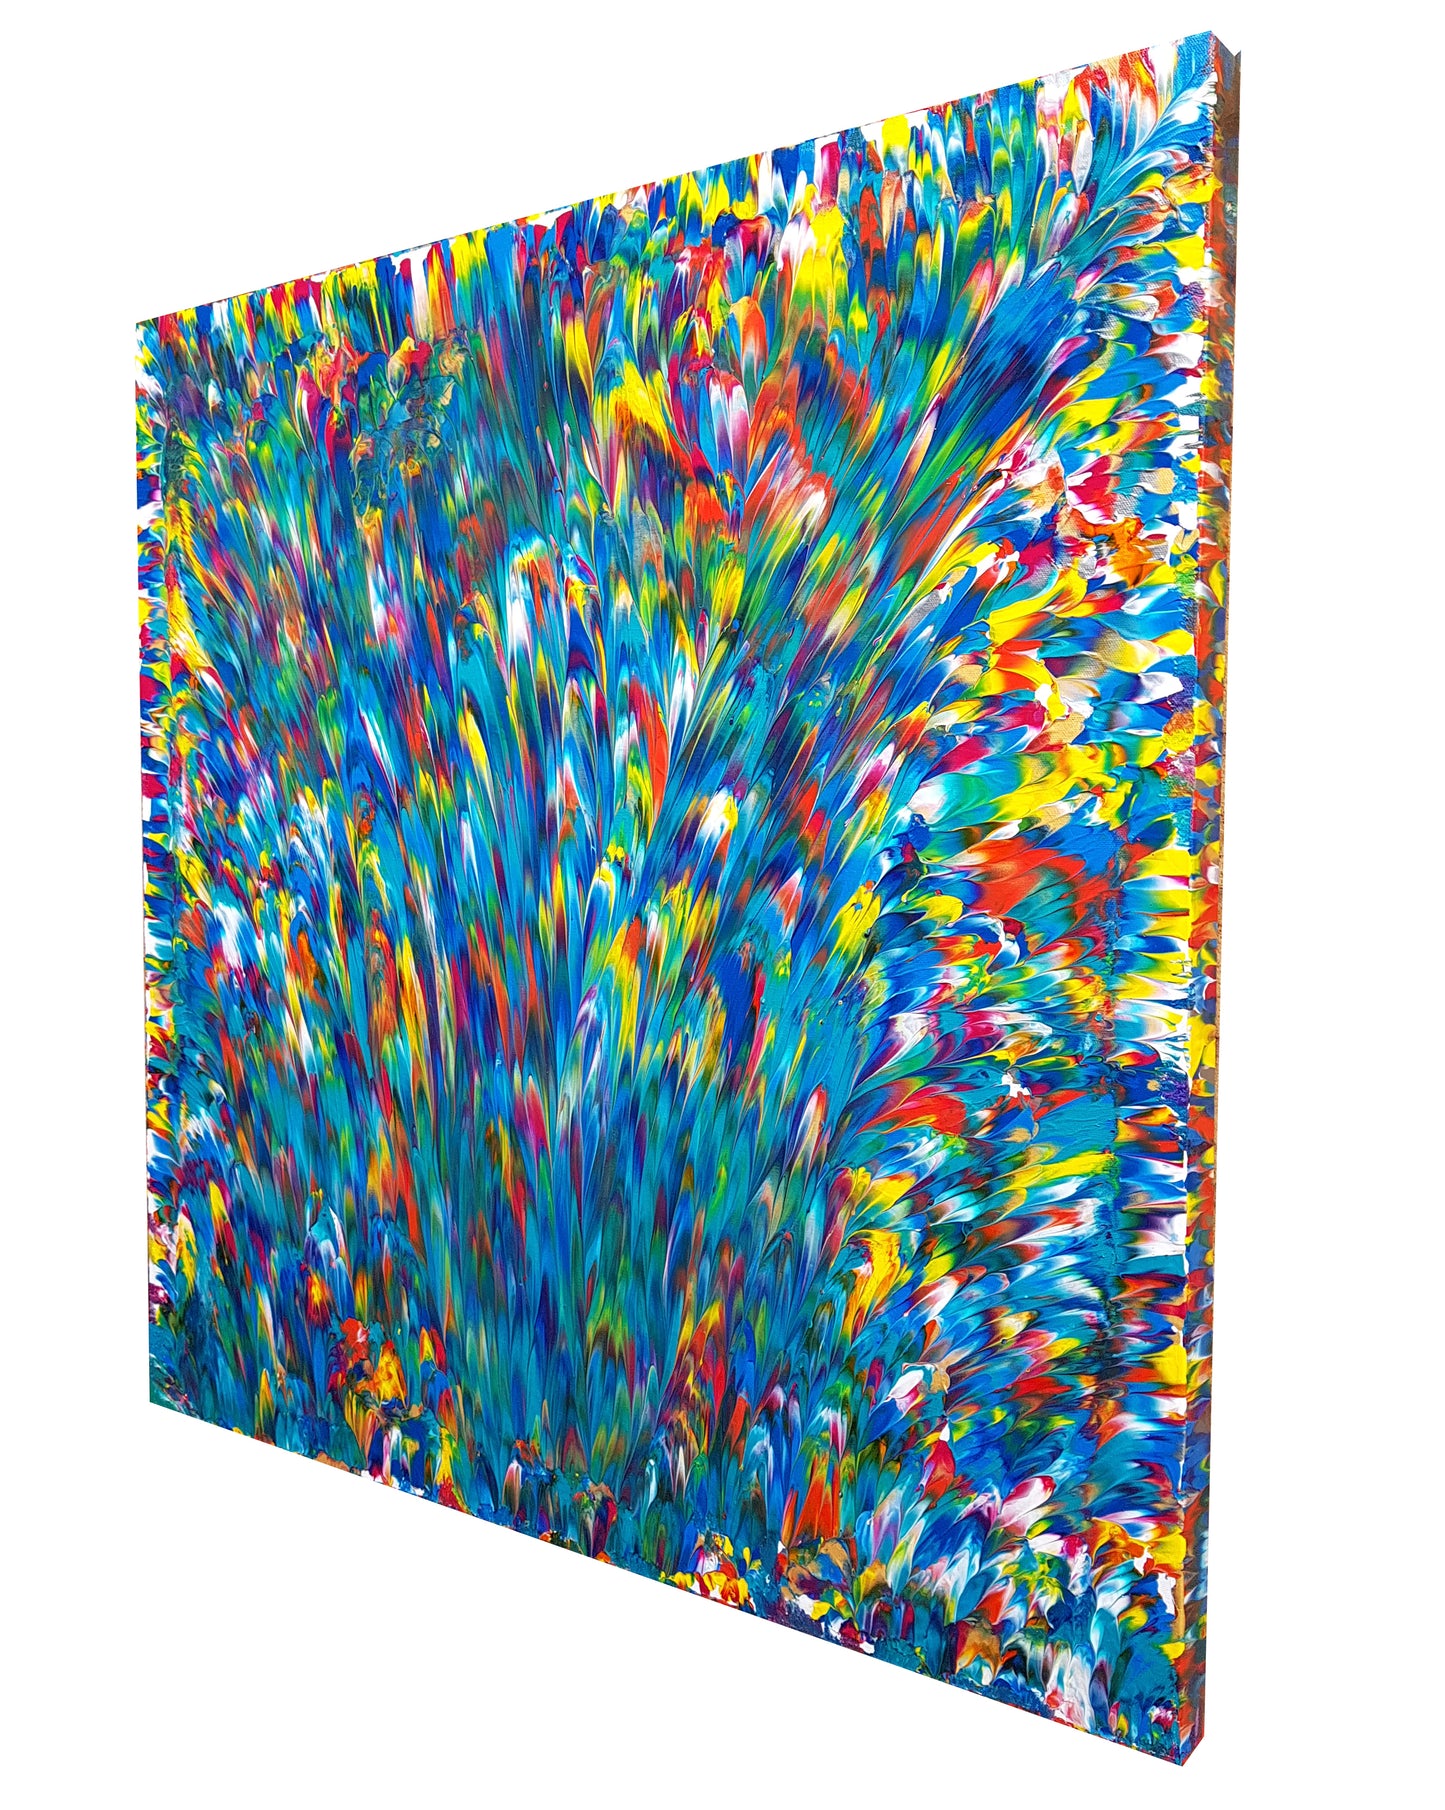 Psychedelic Waterfall No. 2 | 36 x 36 IN